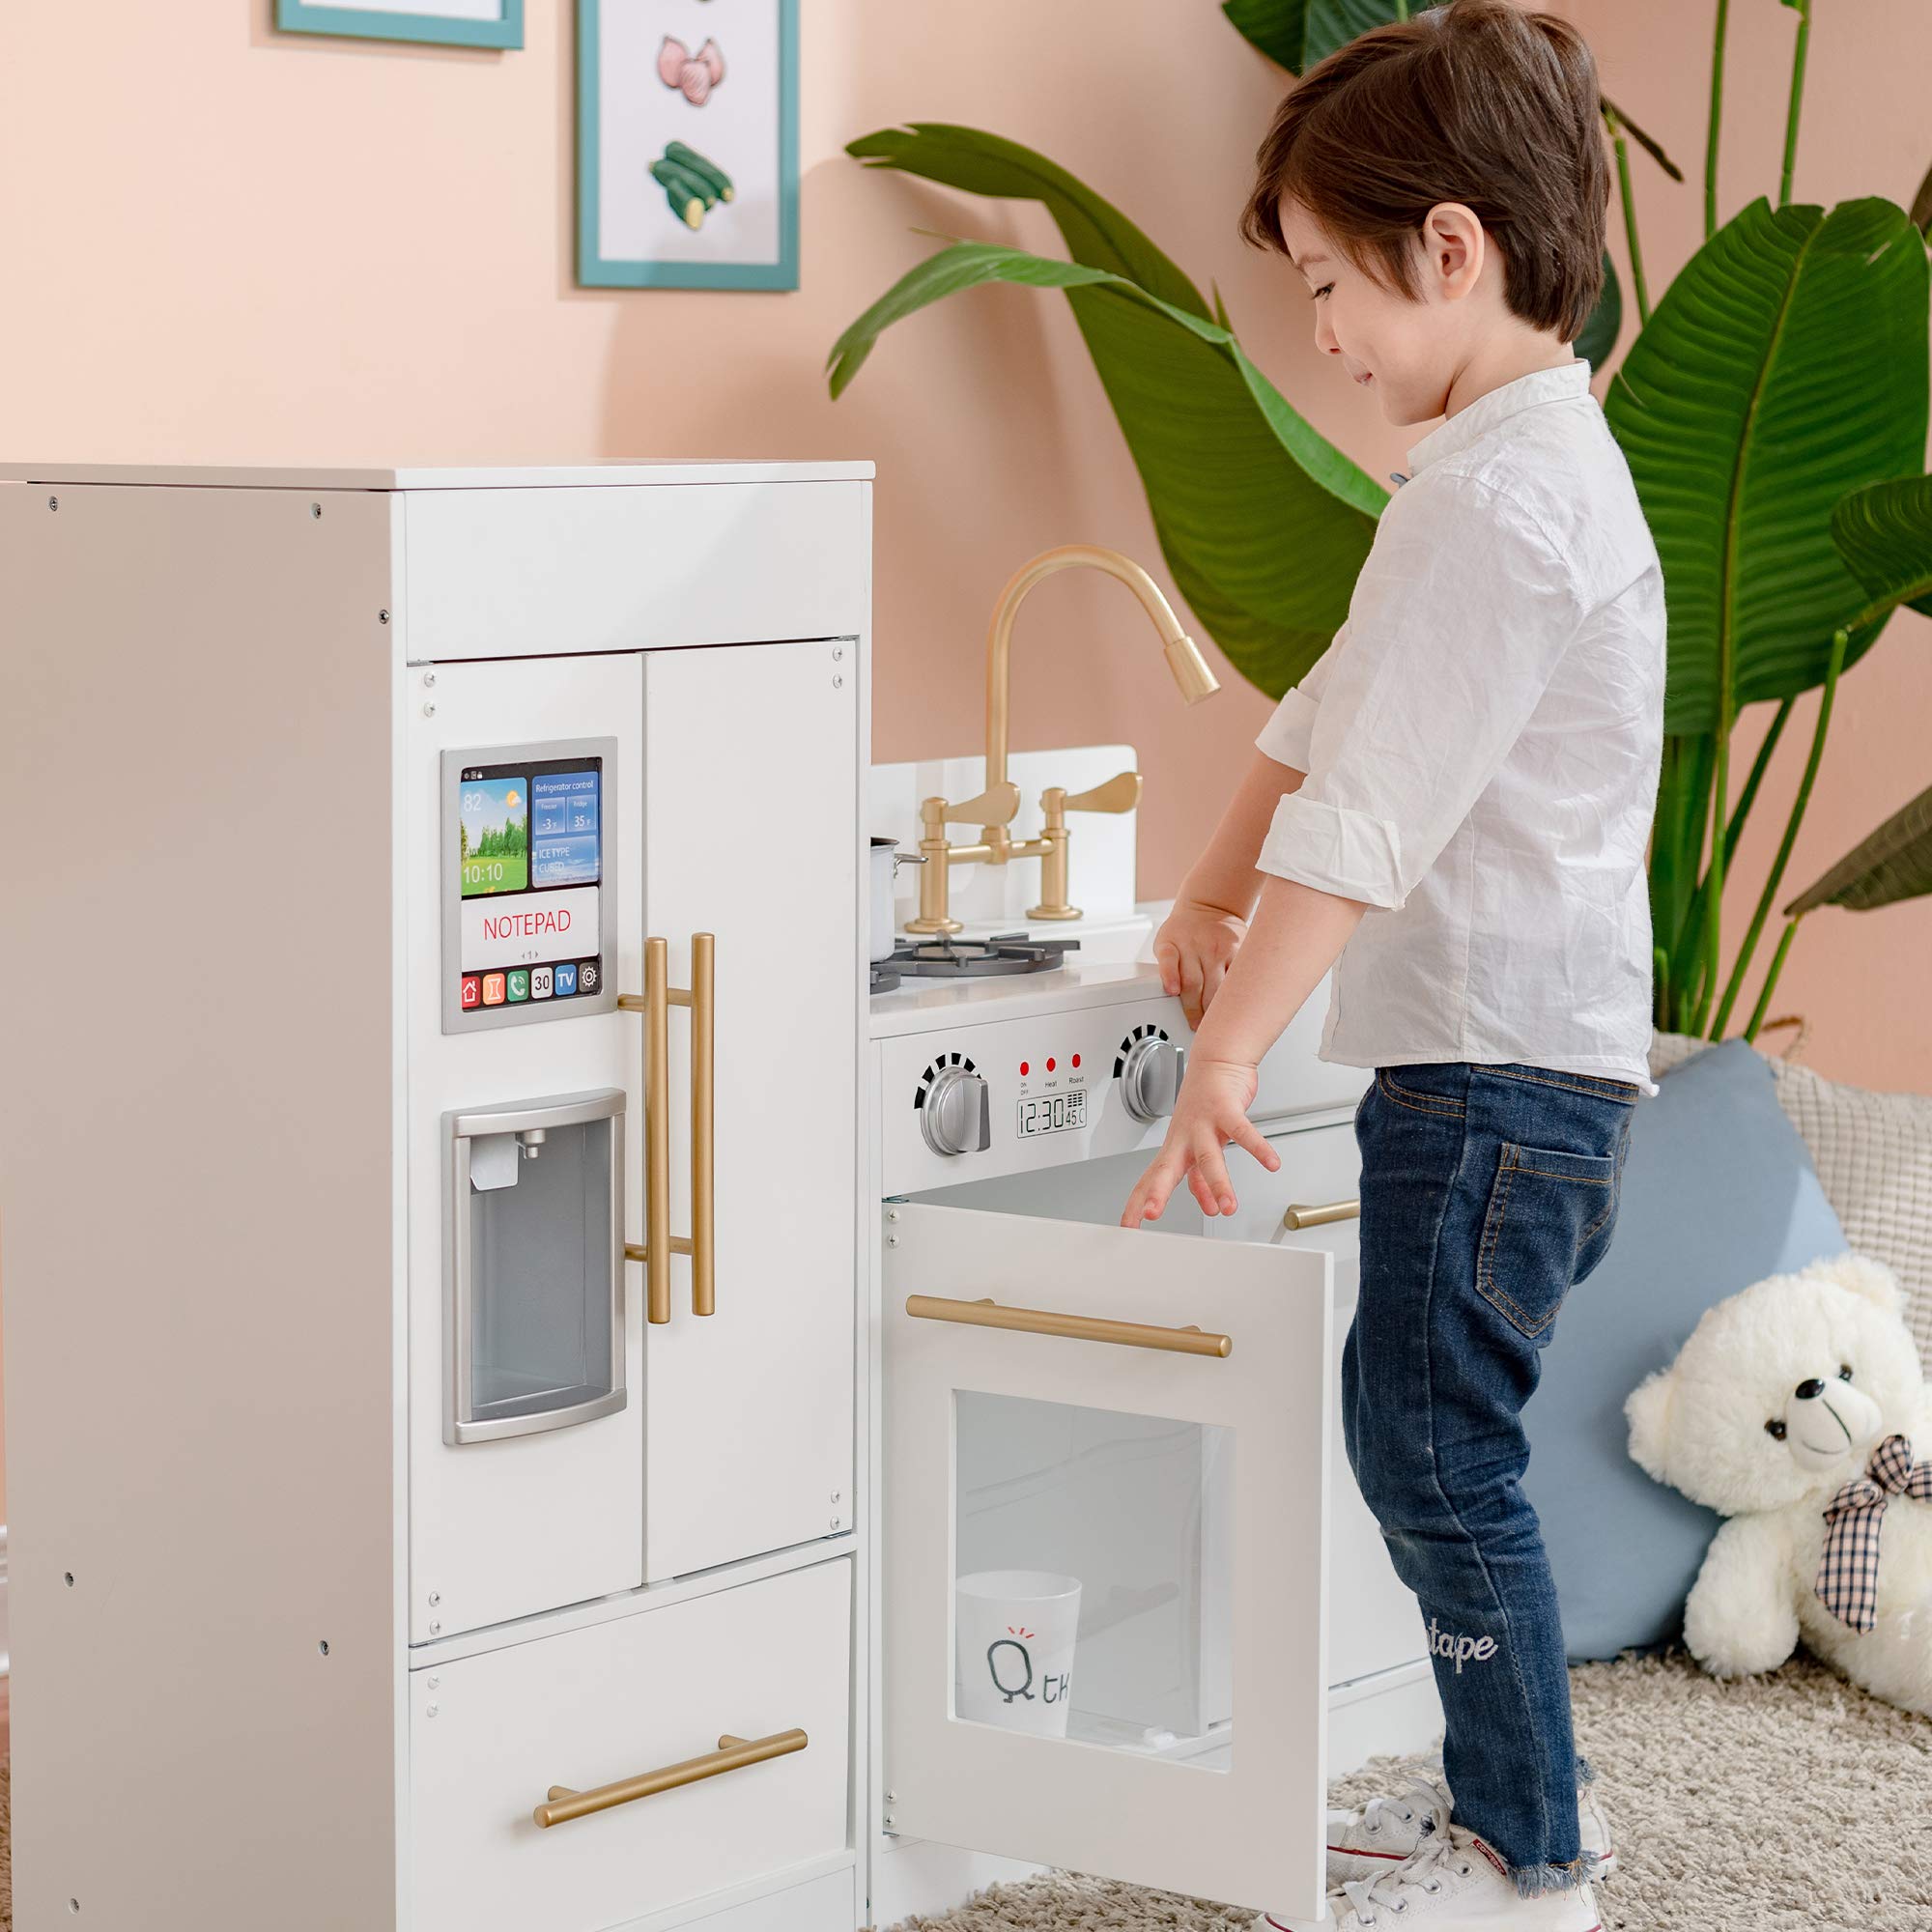 Teamson Kids Little Chef Charlotte Kids Play Kitchen, Wooden Kitchen Playset for Toddlers with Accessories, Pretend Ice Maker, Modular Design, & Storage Space, White/Gold, Gift for Ages 3+